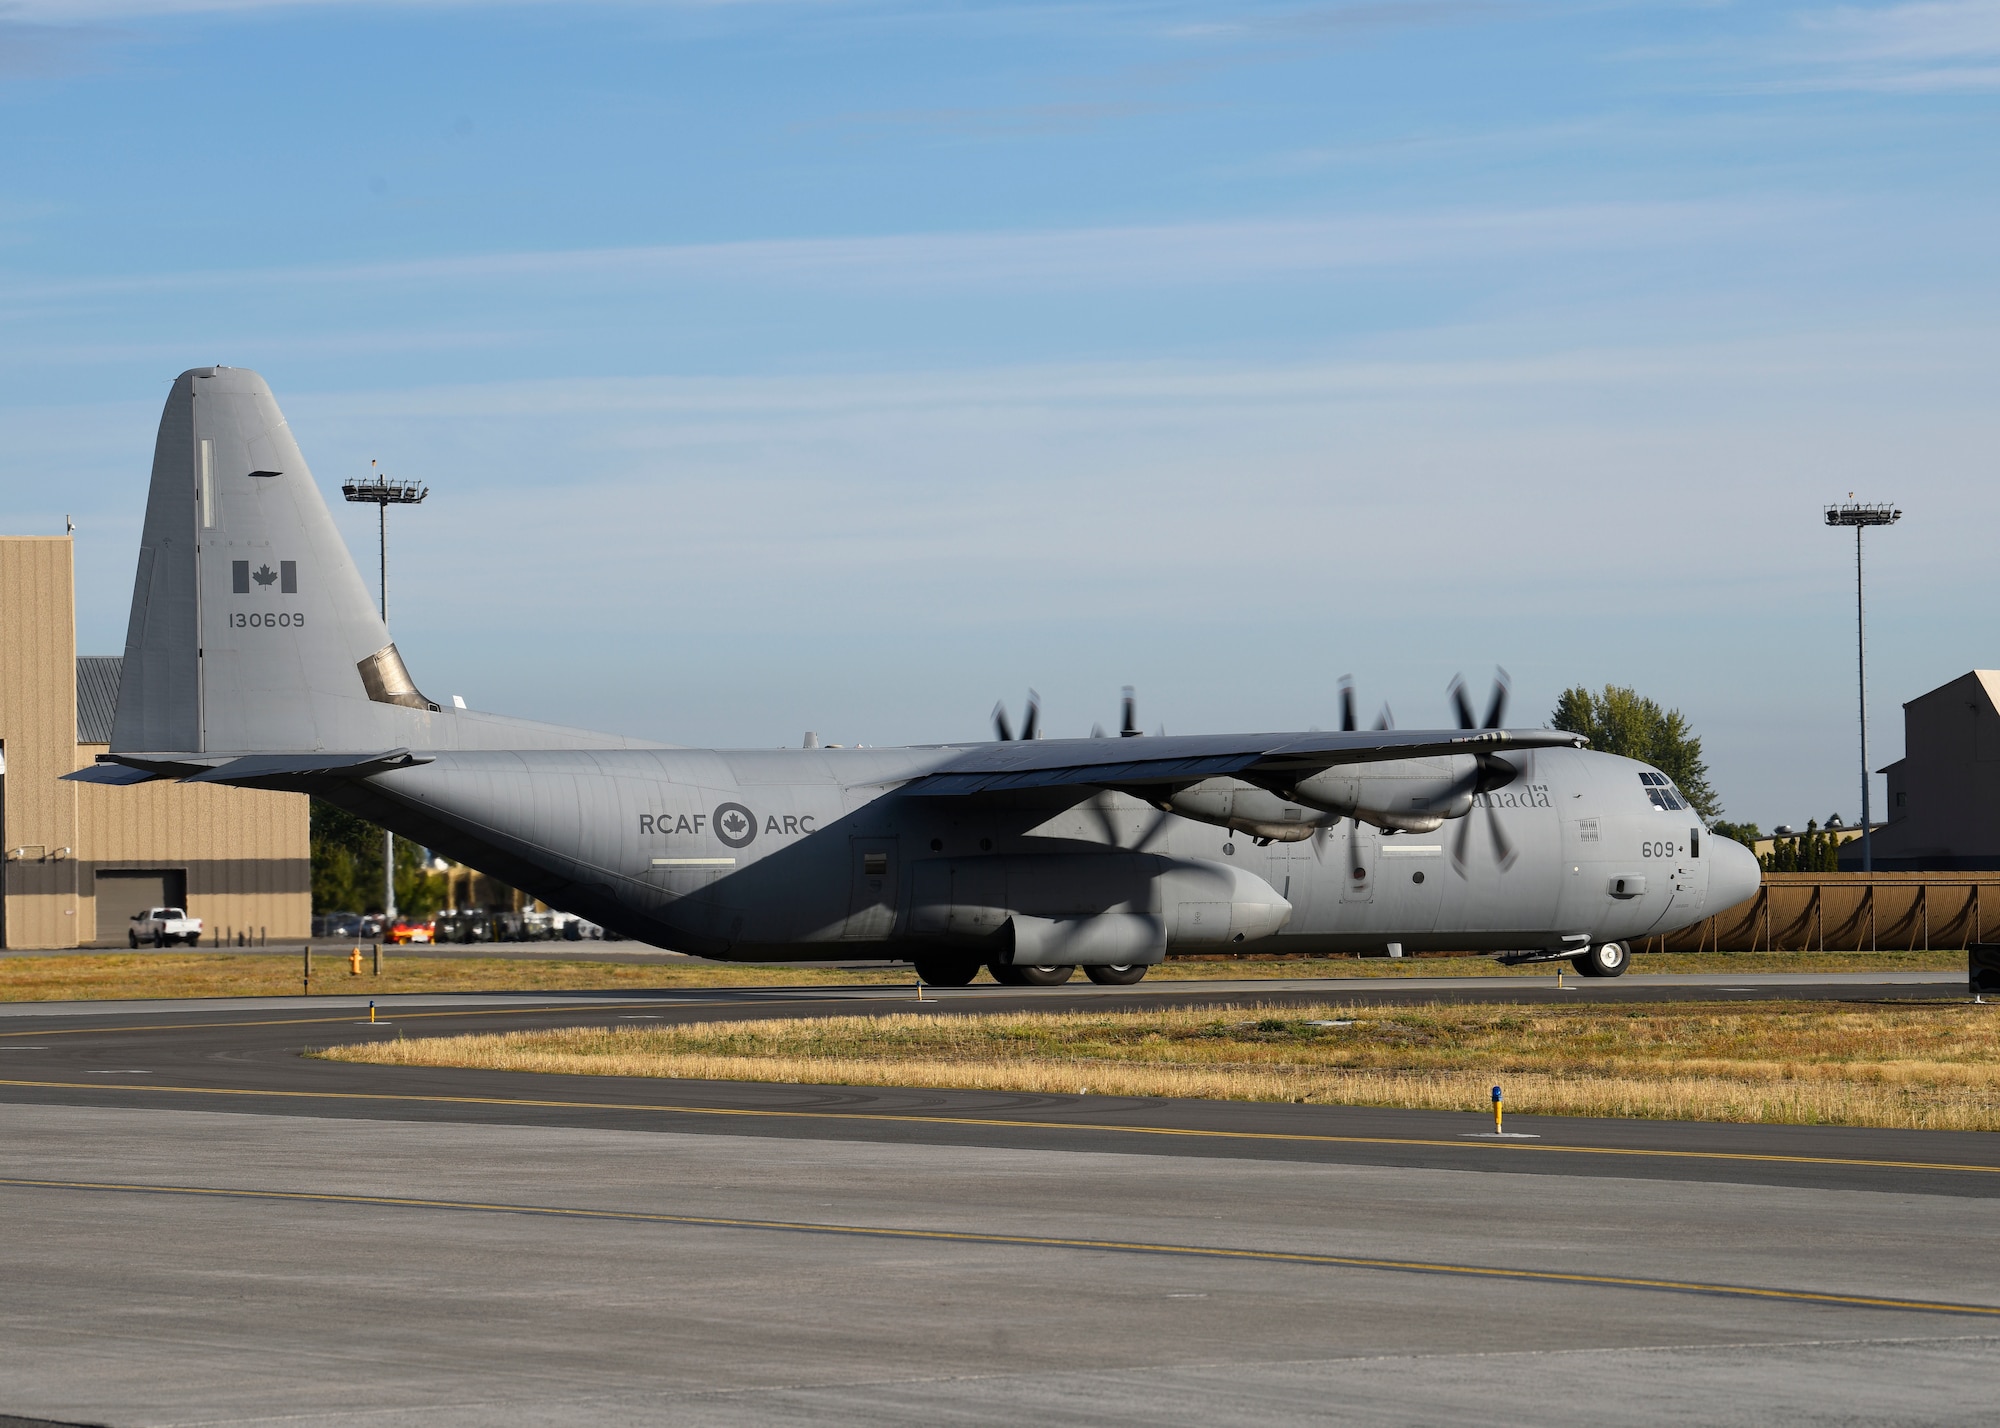 A Royal Canadian Air Force C-130J Hercules taxis down the flightline during exercise Mobility Guardian 2019 at Fairchild Air Force Base, Washington, Sept. 12, 2019. More than 4,000 personnel participated in or observed exercise Mobility Guardian, including Total Force Airmen, Joint, Combat Air Forces, and International Partners. (U.S. Air Force photo by Airman 1st Class Lawrence Sena)